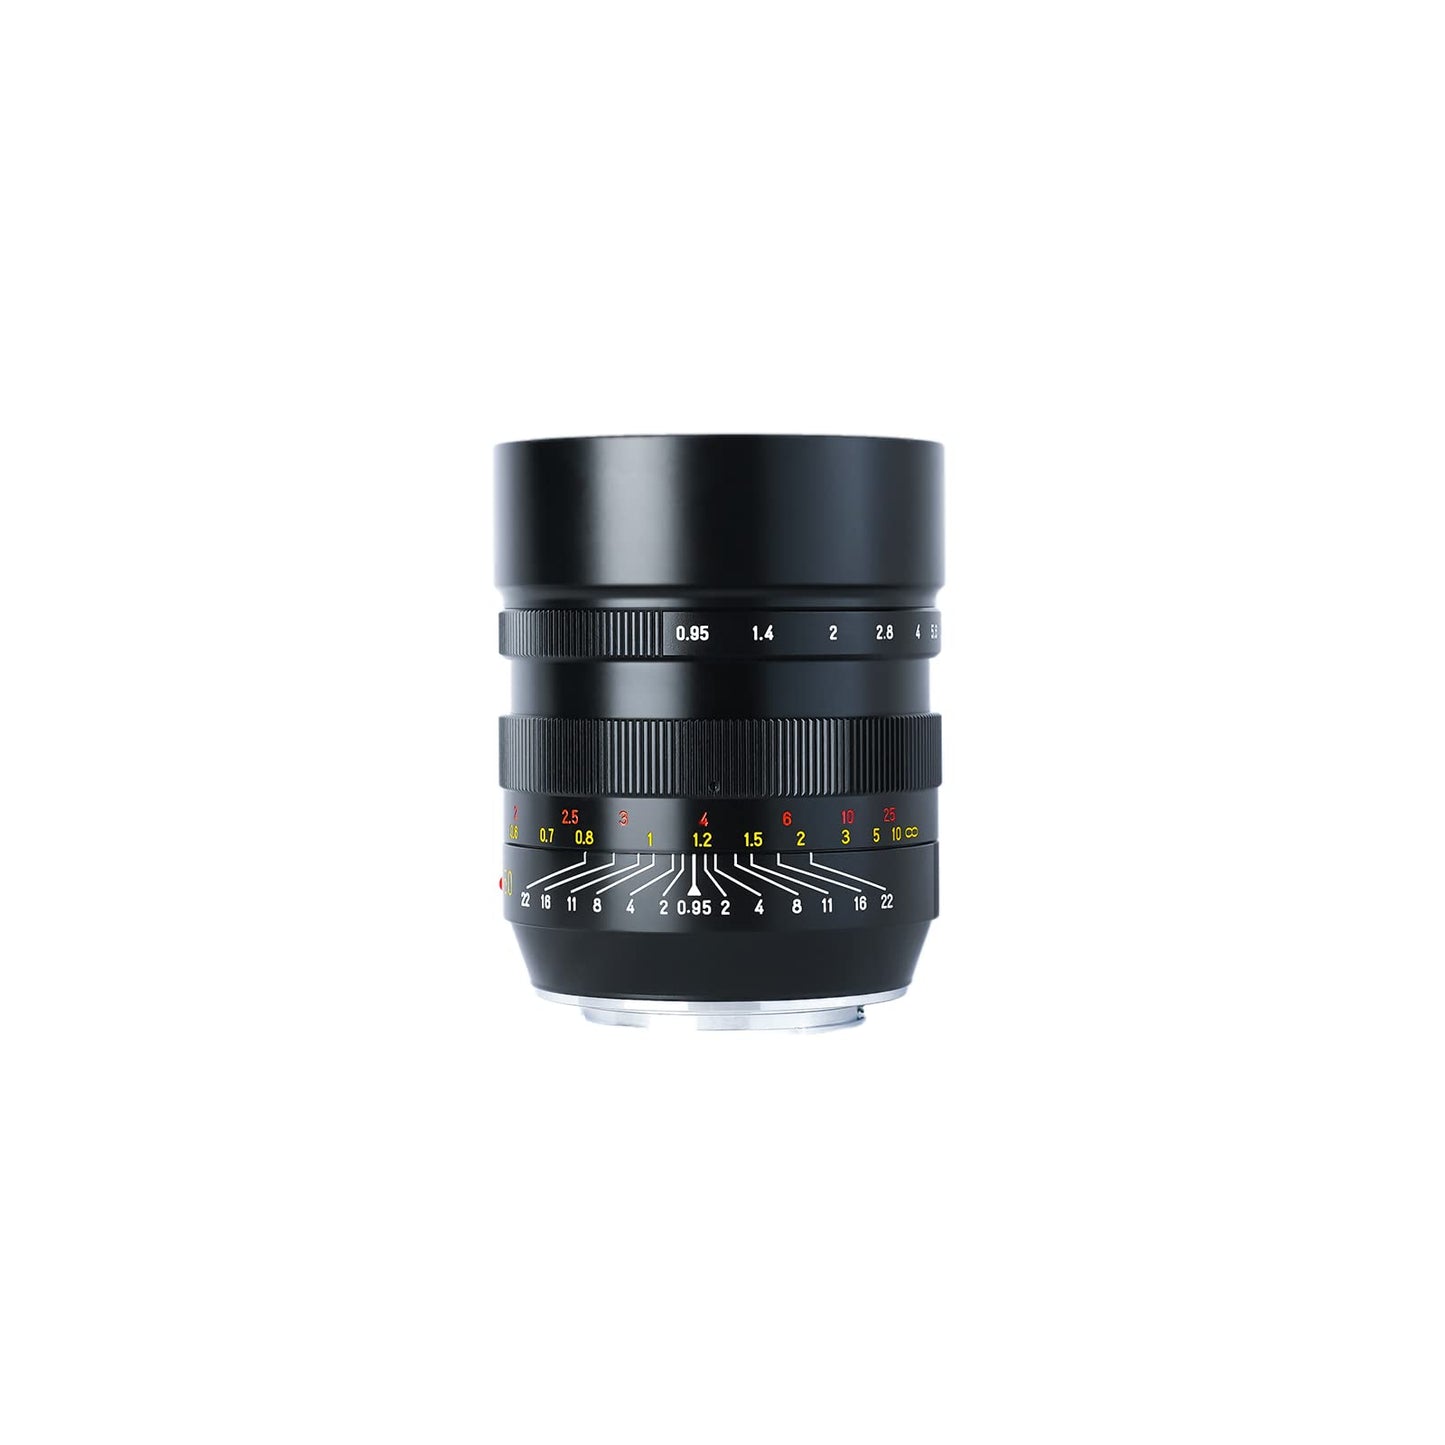 50mm F0.95 Full Frame Large Aperture Manual Focus Mirrorless Camera Lens, Fit for Sony E Mount